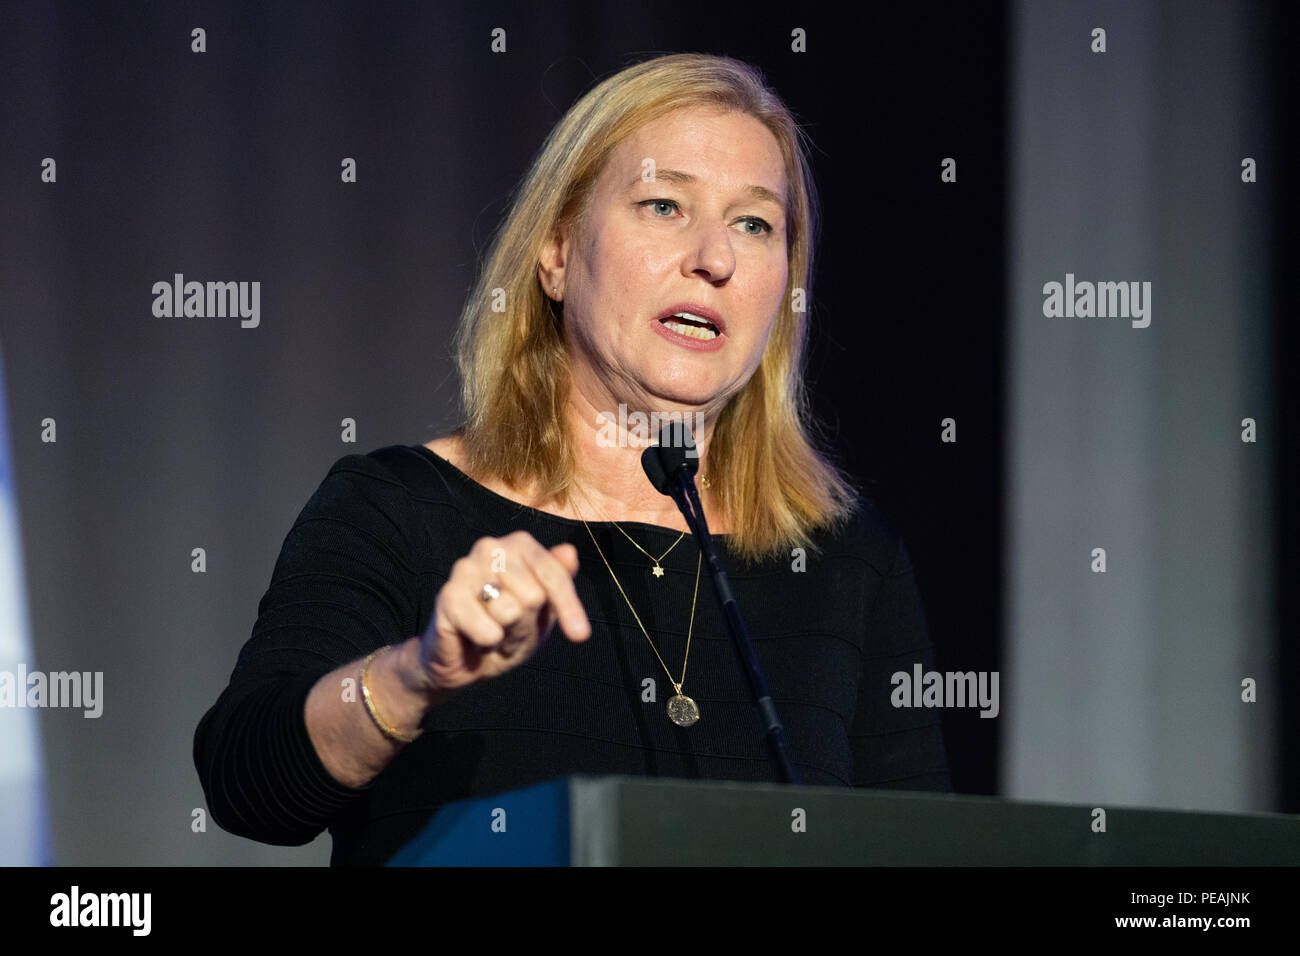 Tzipi Livni, Former Minister of Justice of Israel and Member of Knesset, speaking at the J Street National Conference in Washington, DC on April 15, 2 Stock Photo